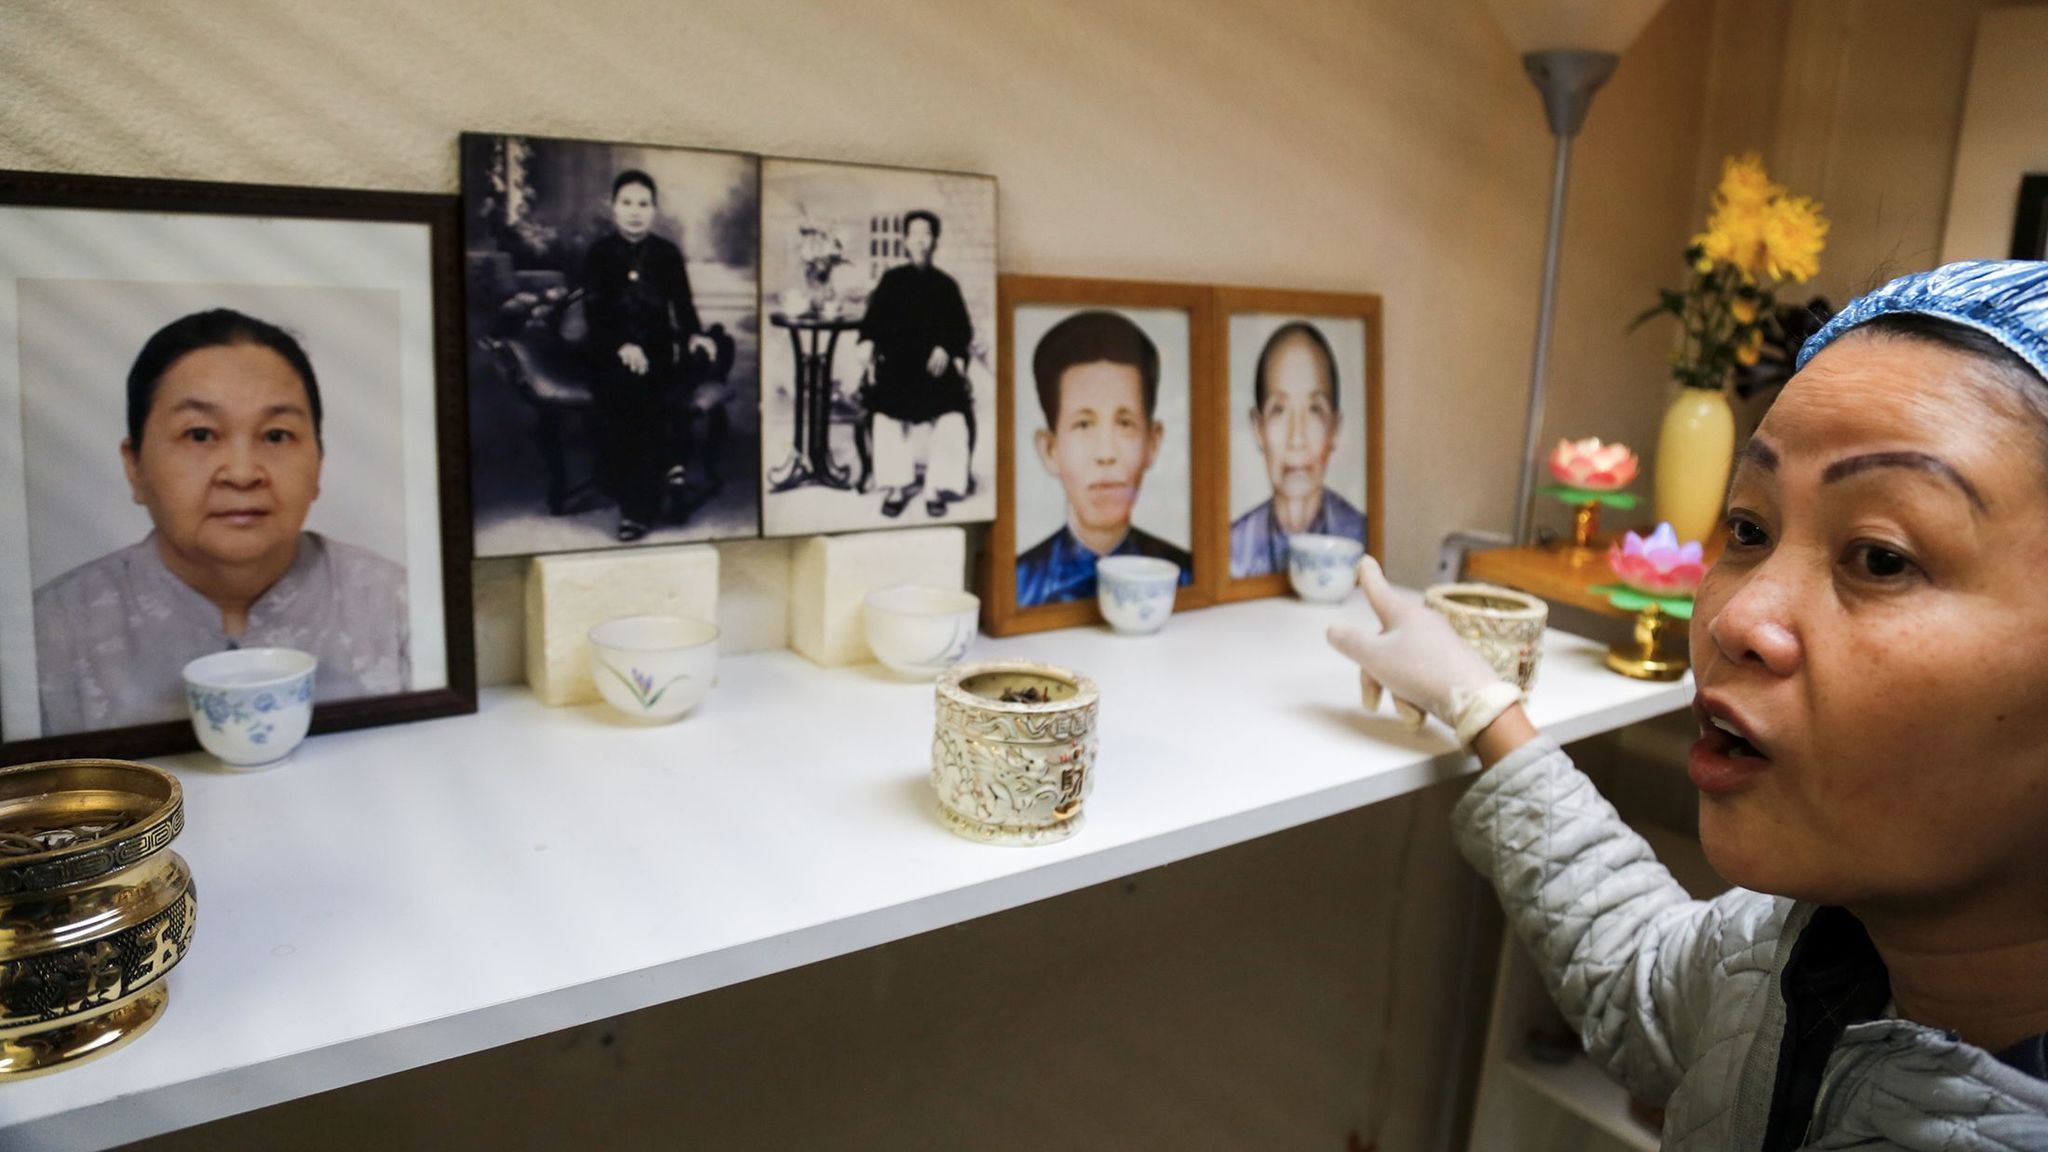 Hue Phan points to pictures of her and her husband's parents and grandparents arranged for a home shrine.